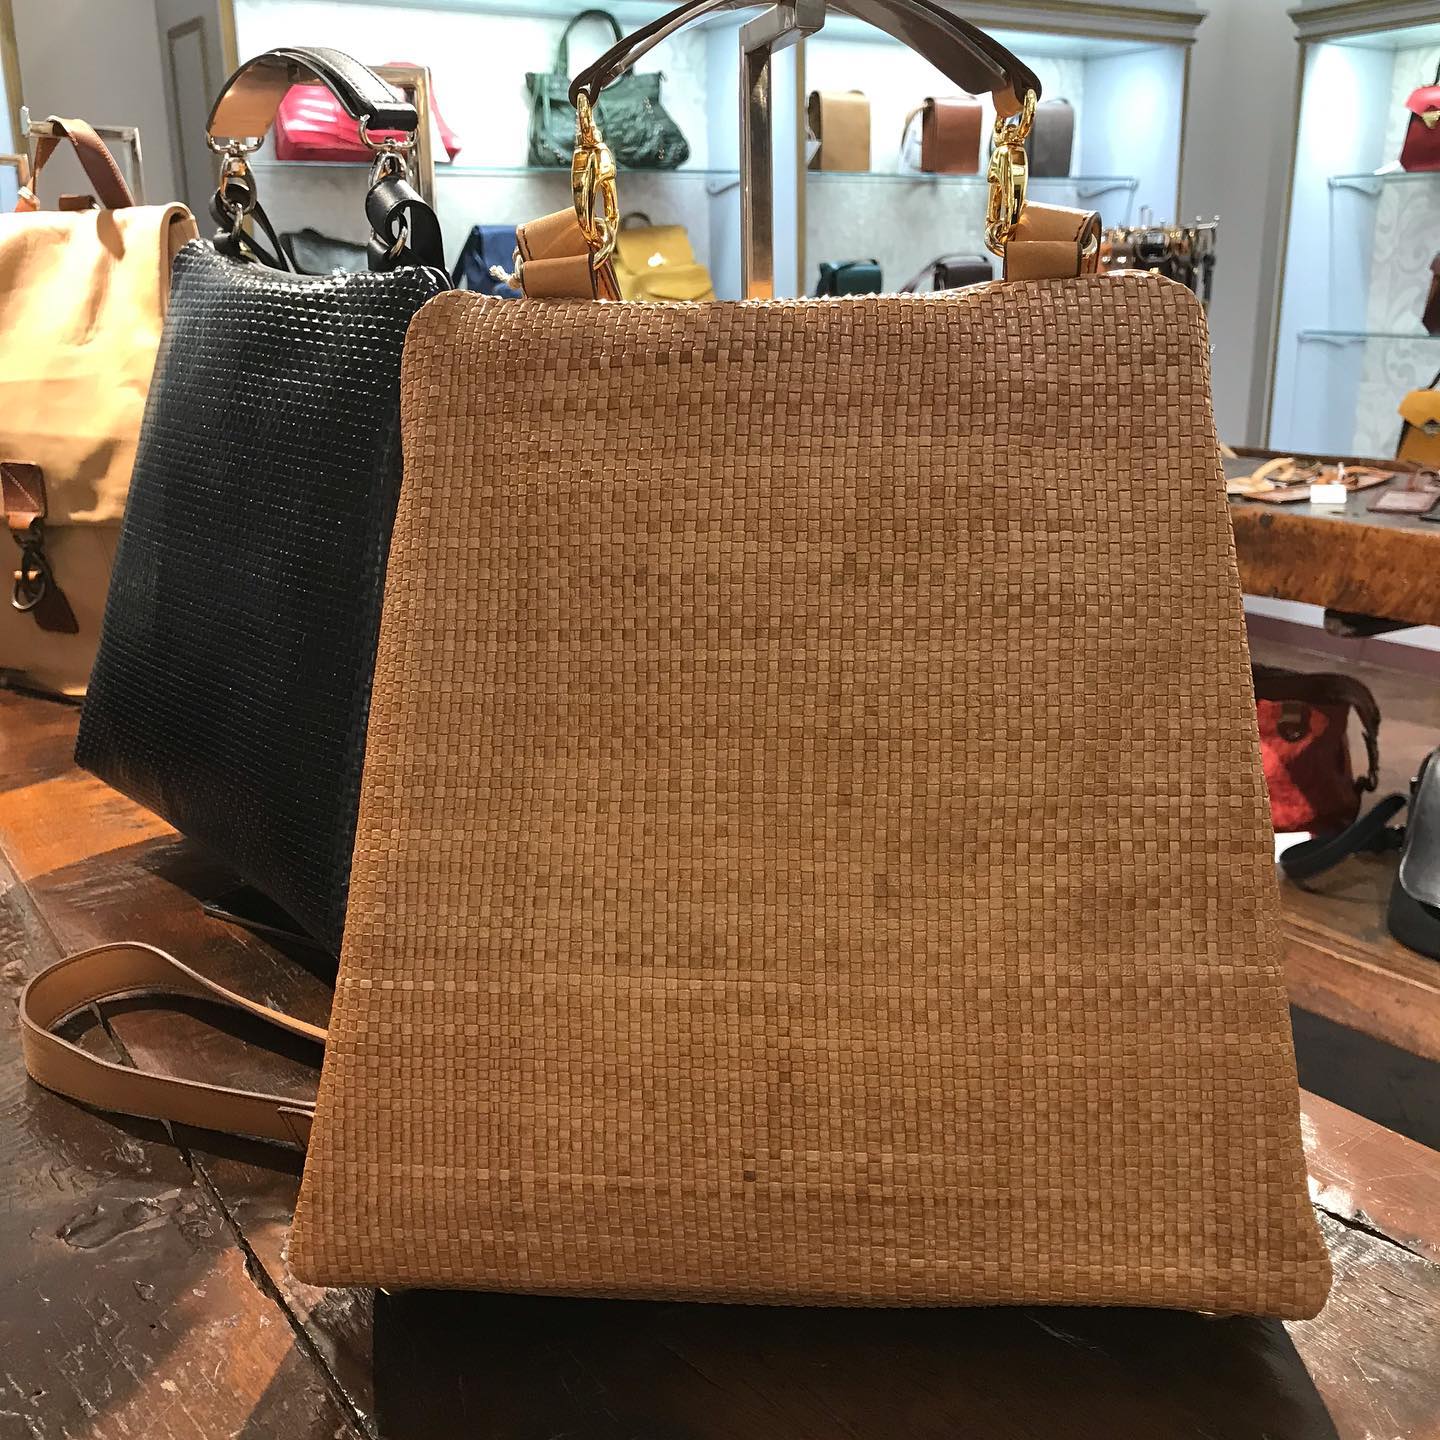 Woven Raffia Tote With Braided Leather Handle